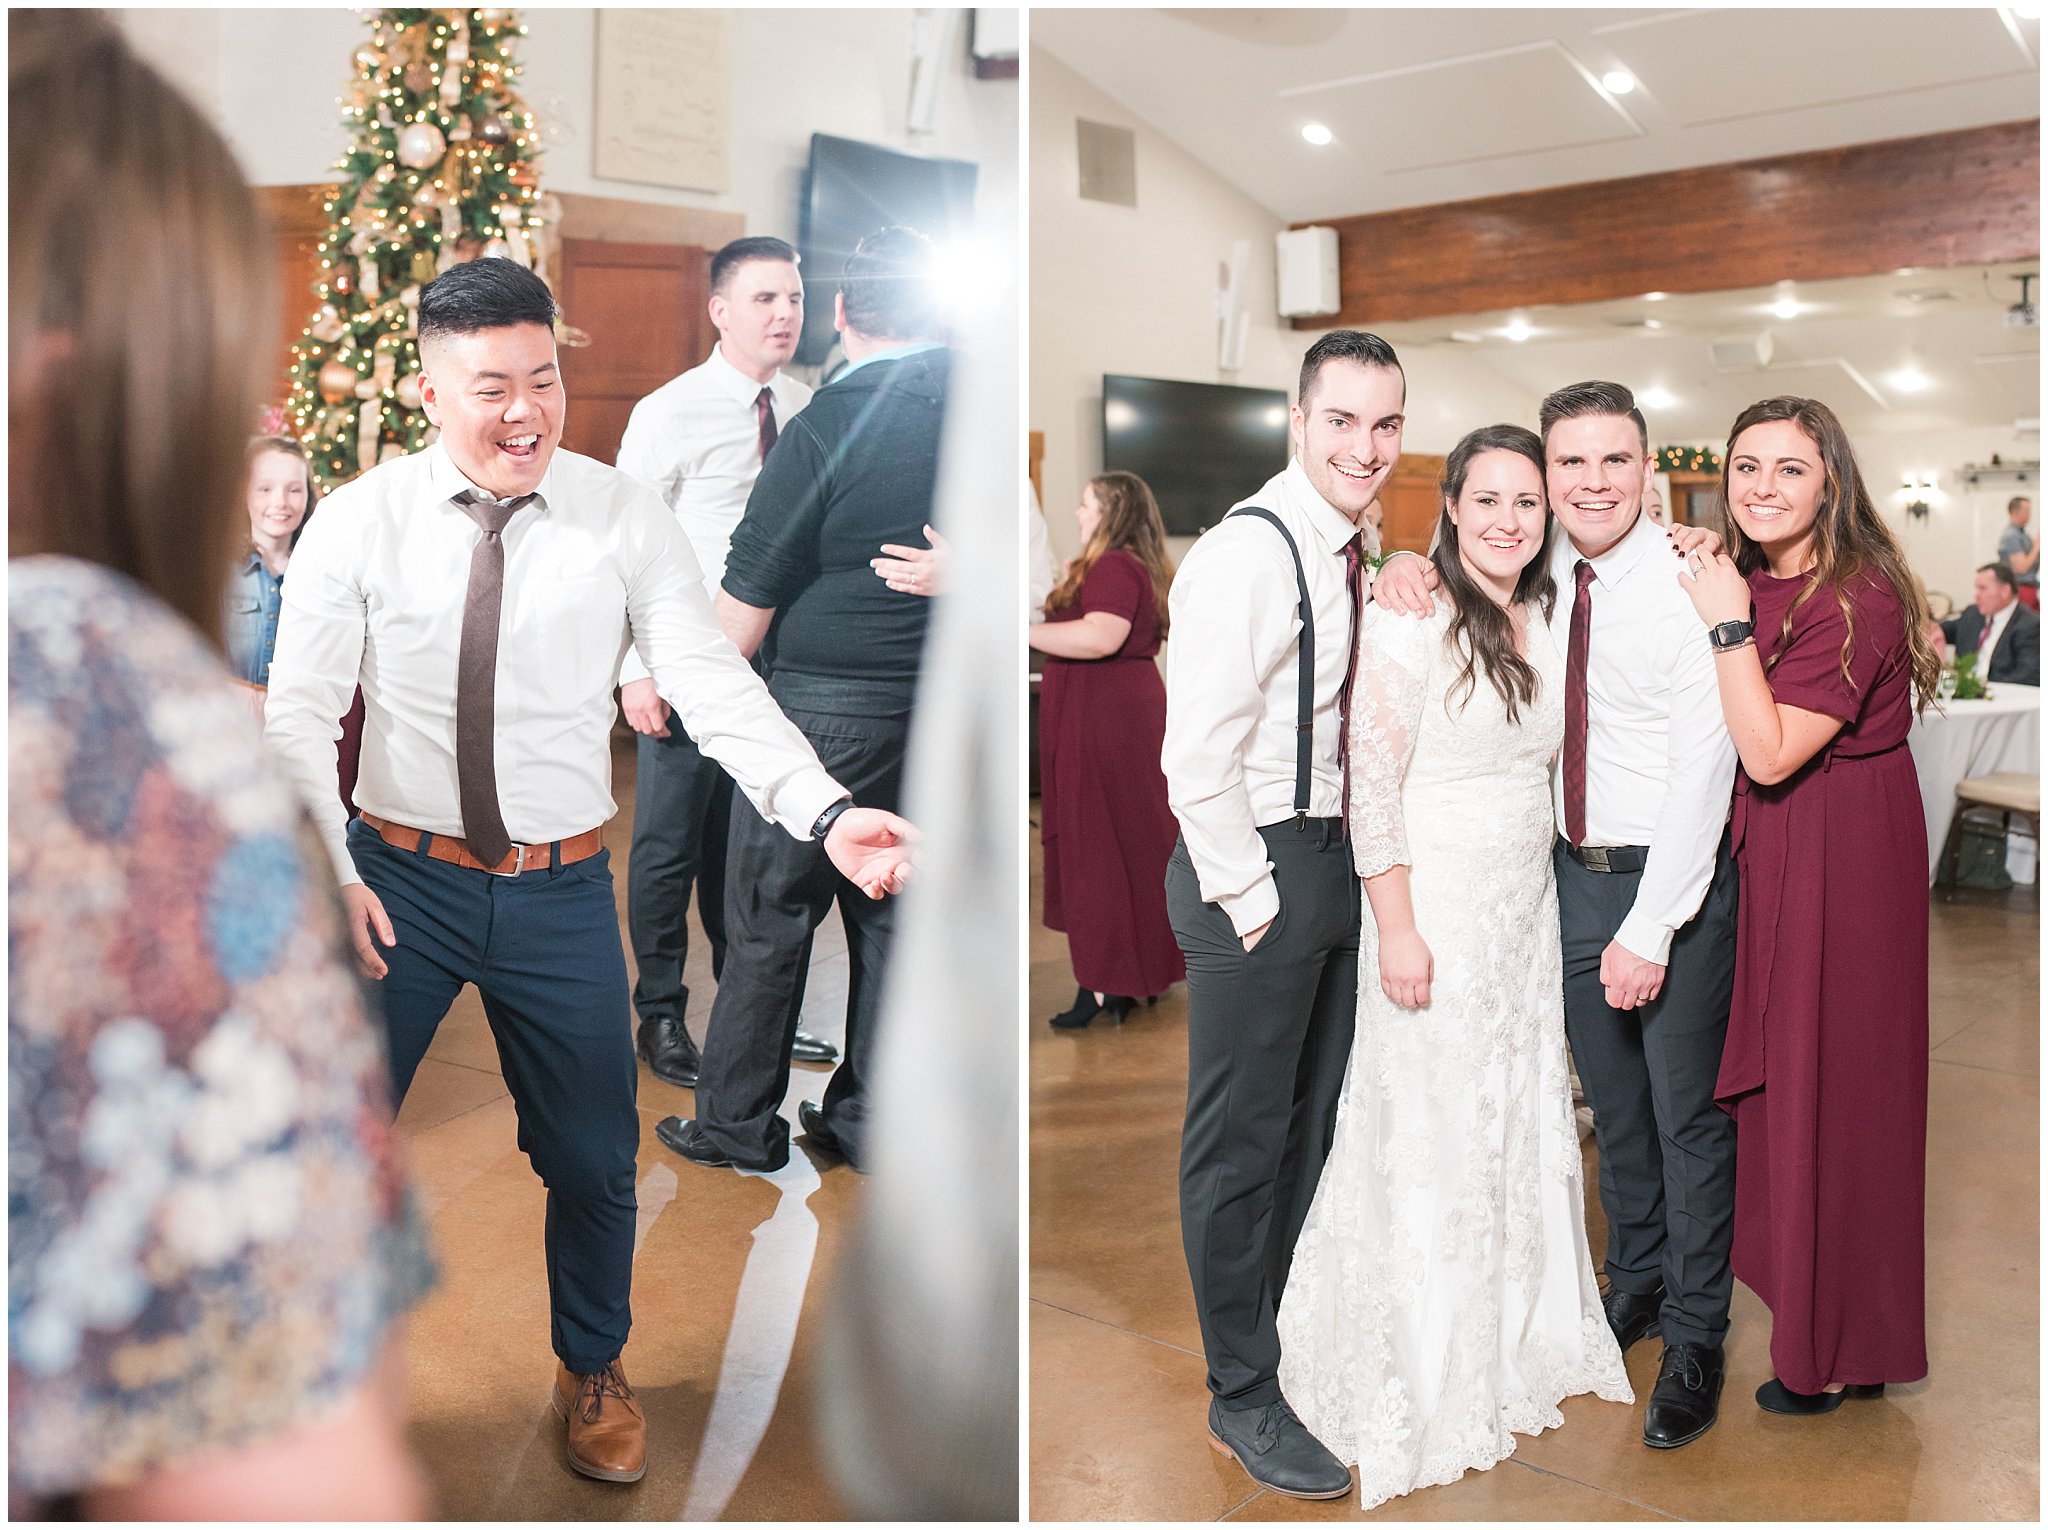 Party dancing at the Gathering Place at Gardner Village | Gardner Village Wedding | The Gathering Place | Jessie and Dallin Photography